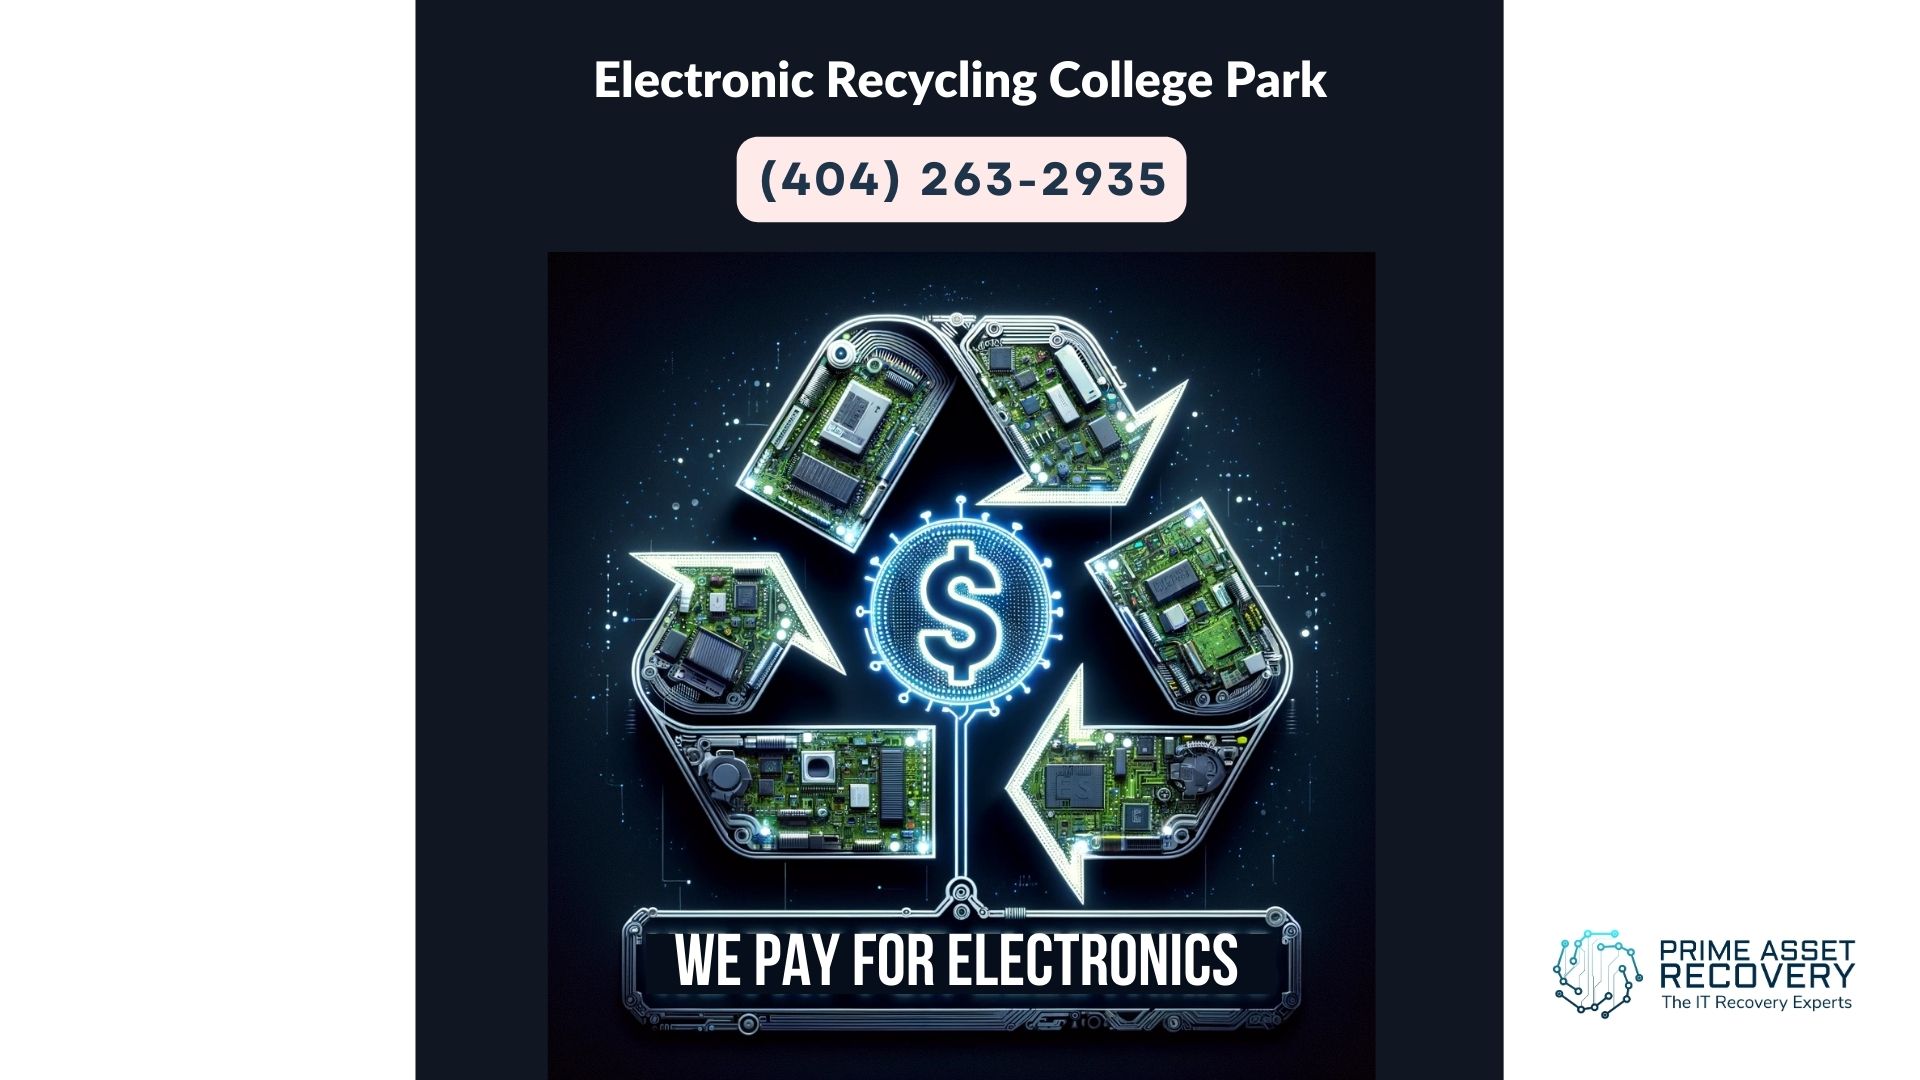 Computer Electronic Recycling College Park - Prime Asset Recovery Your Partner in Responsible Electronics Recycling